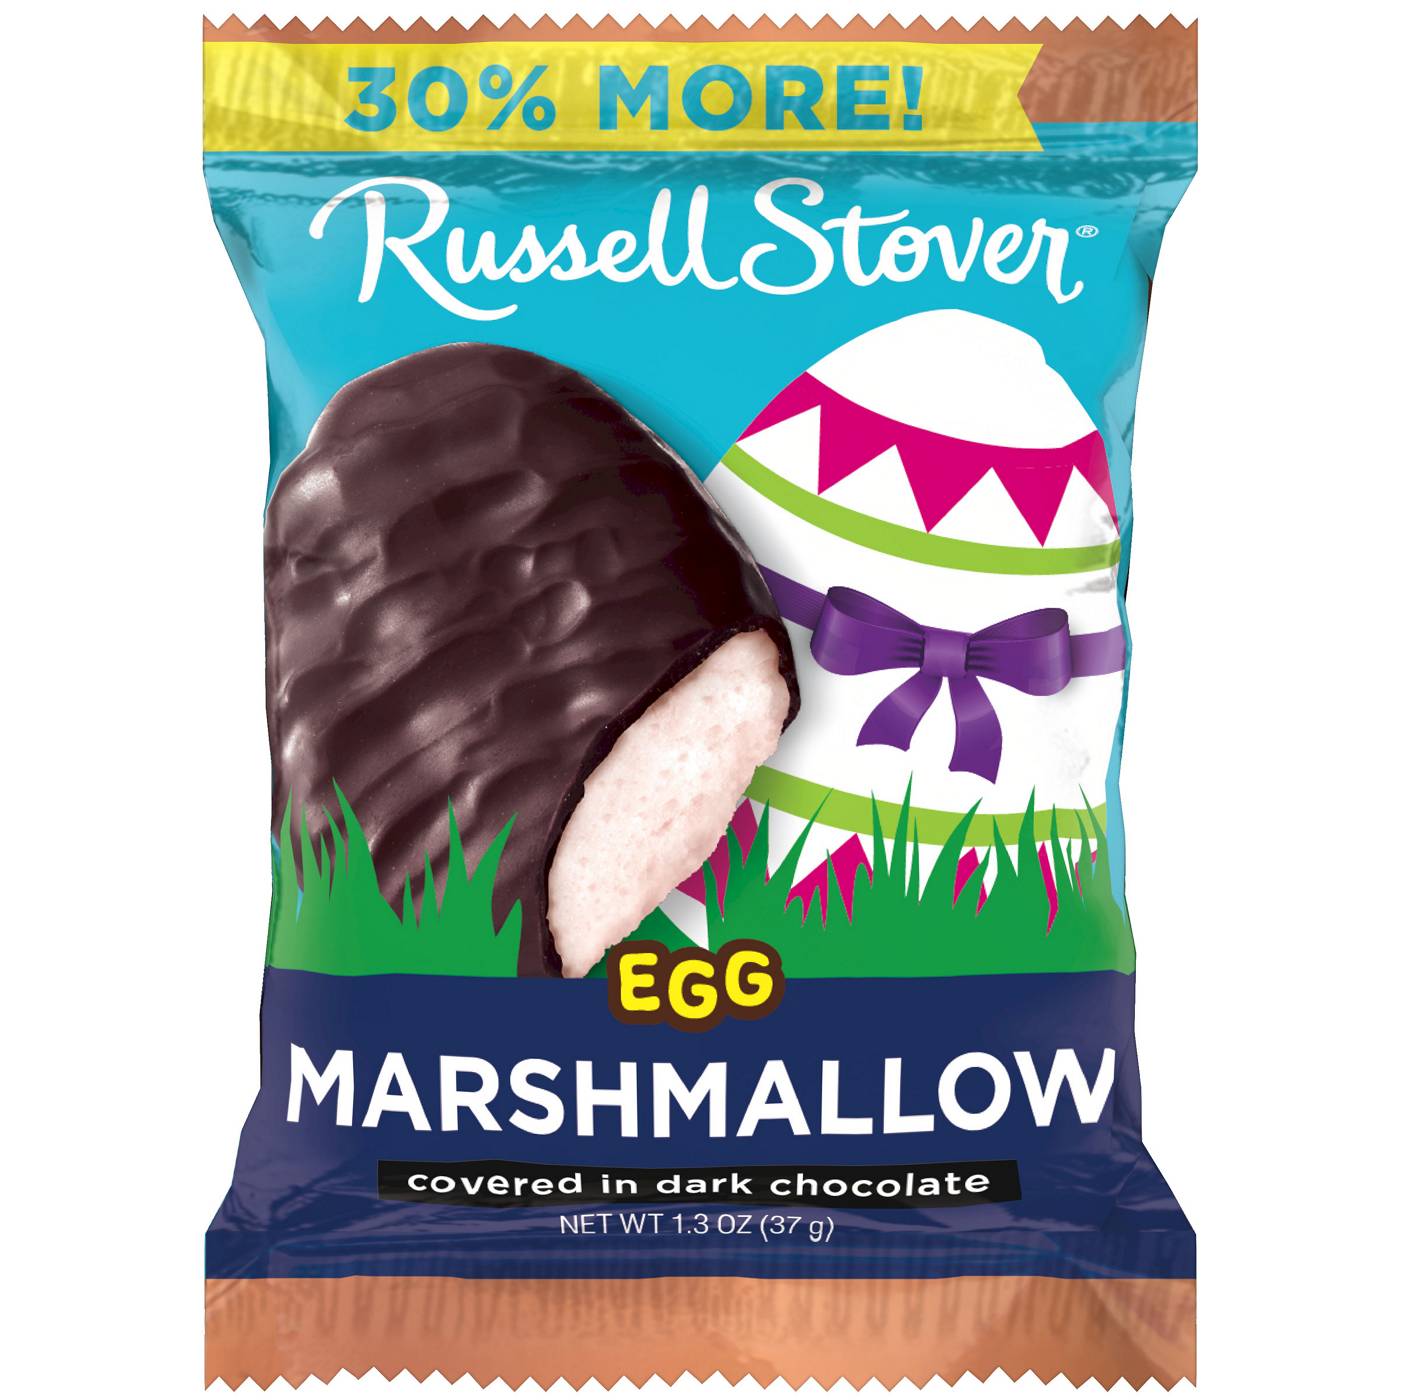 Russell Stover Dark Chocolate Marshmallow Egg Easter Candy; image 1 of 2